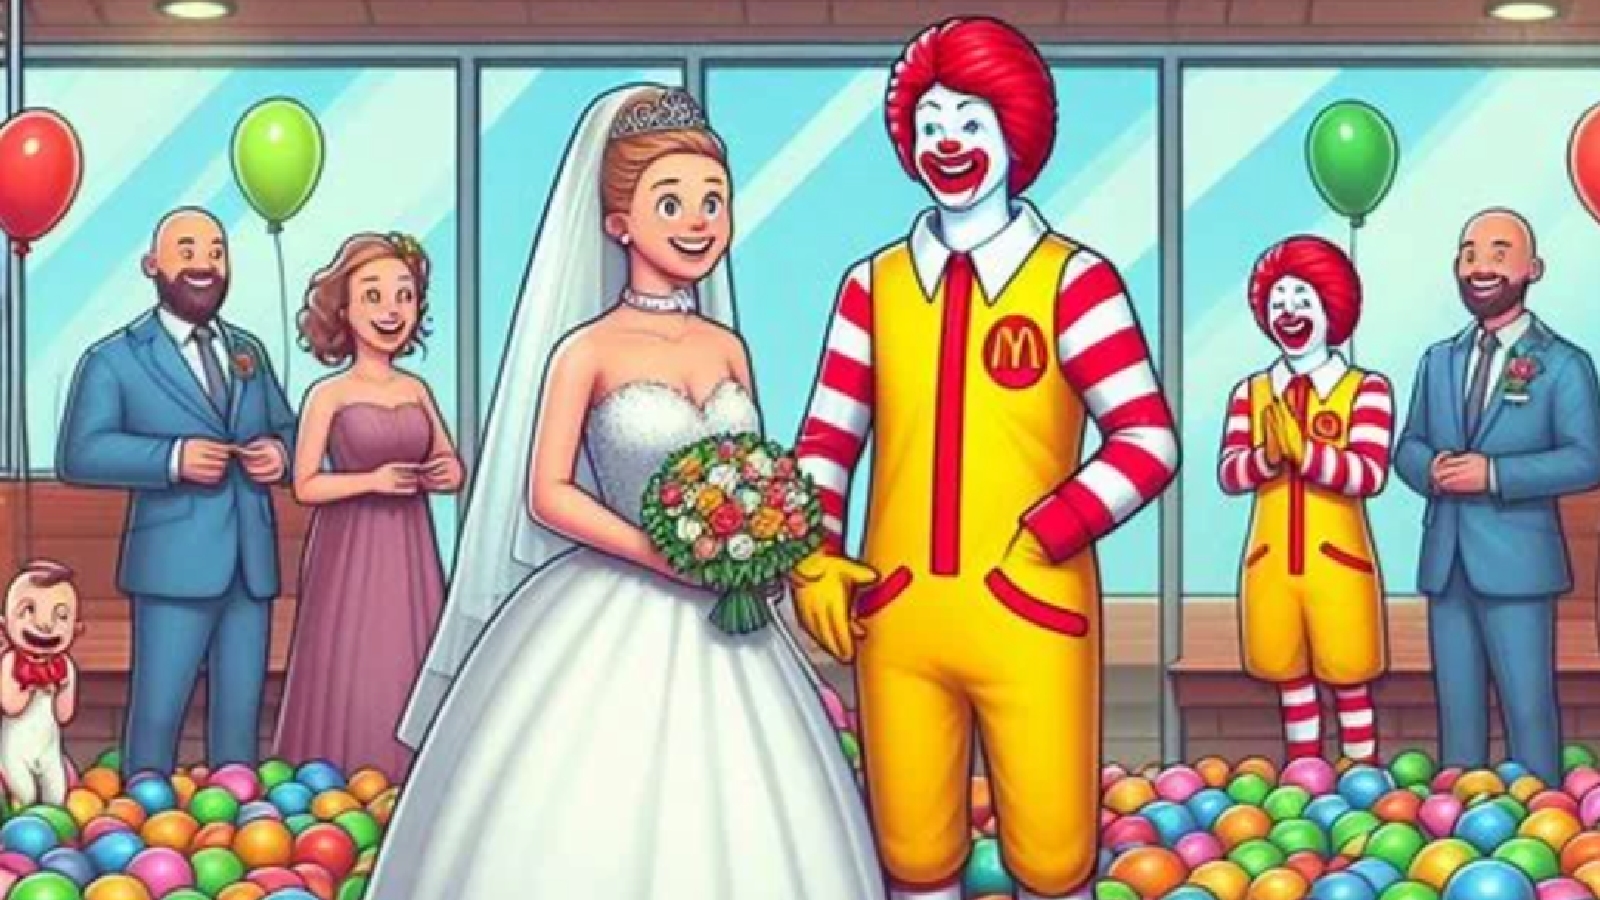 McDonald’s now does wedding catering packages but only in some countries - Dexerto